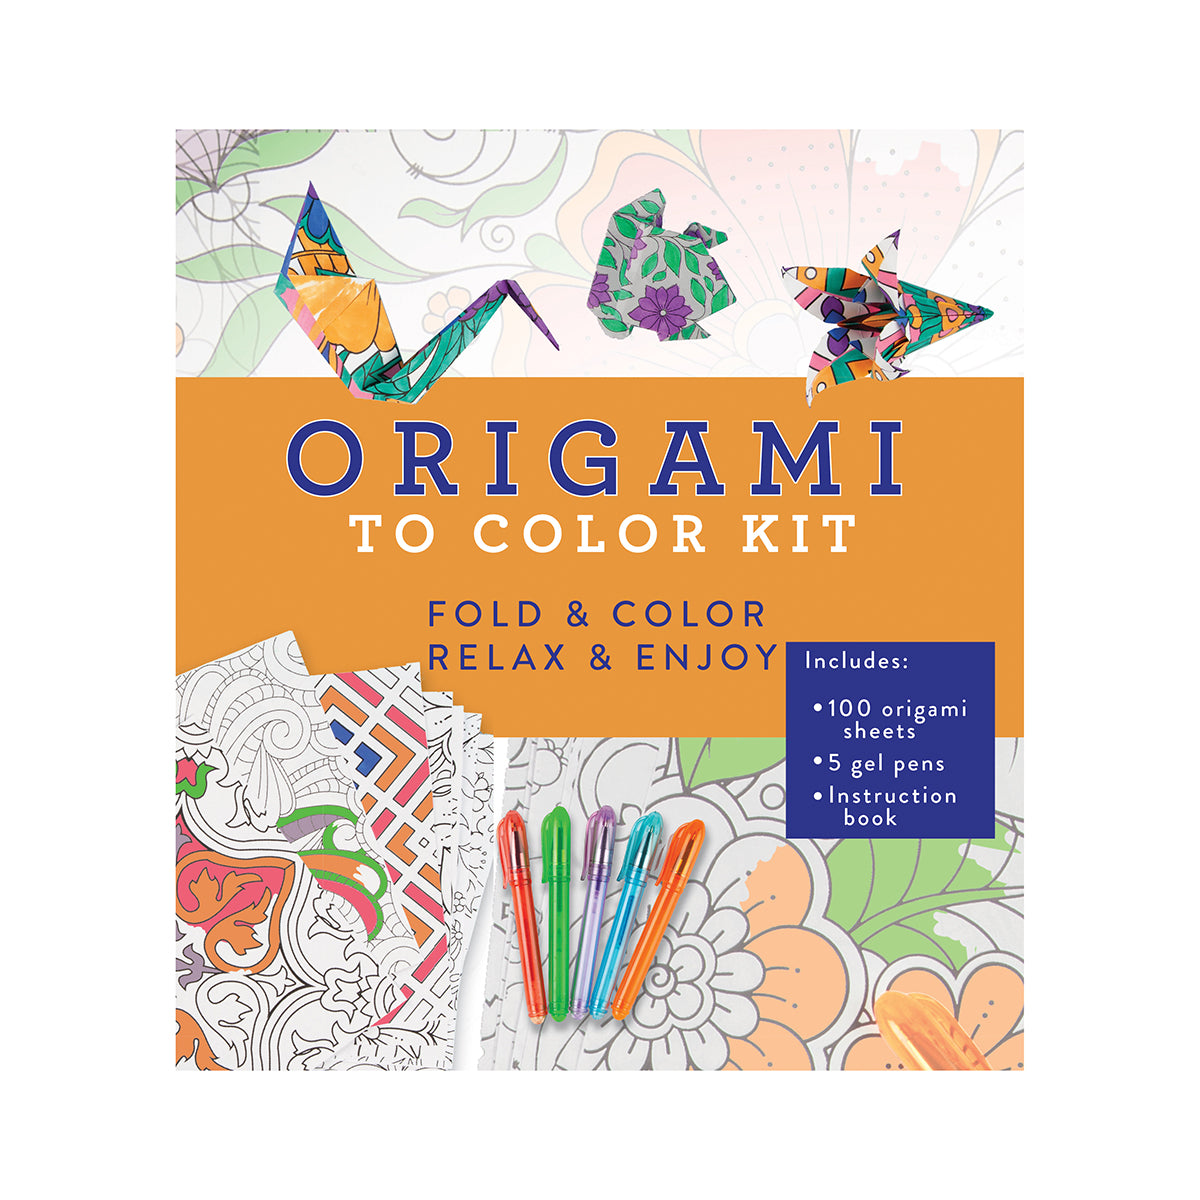 Origami to Color Kit